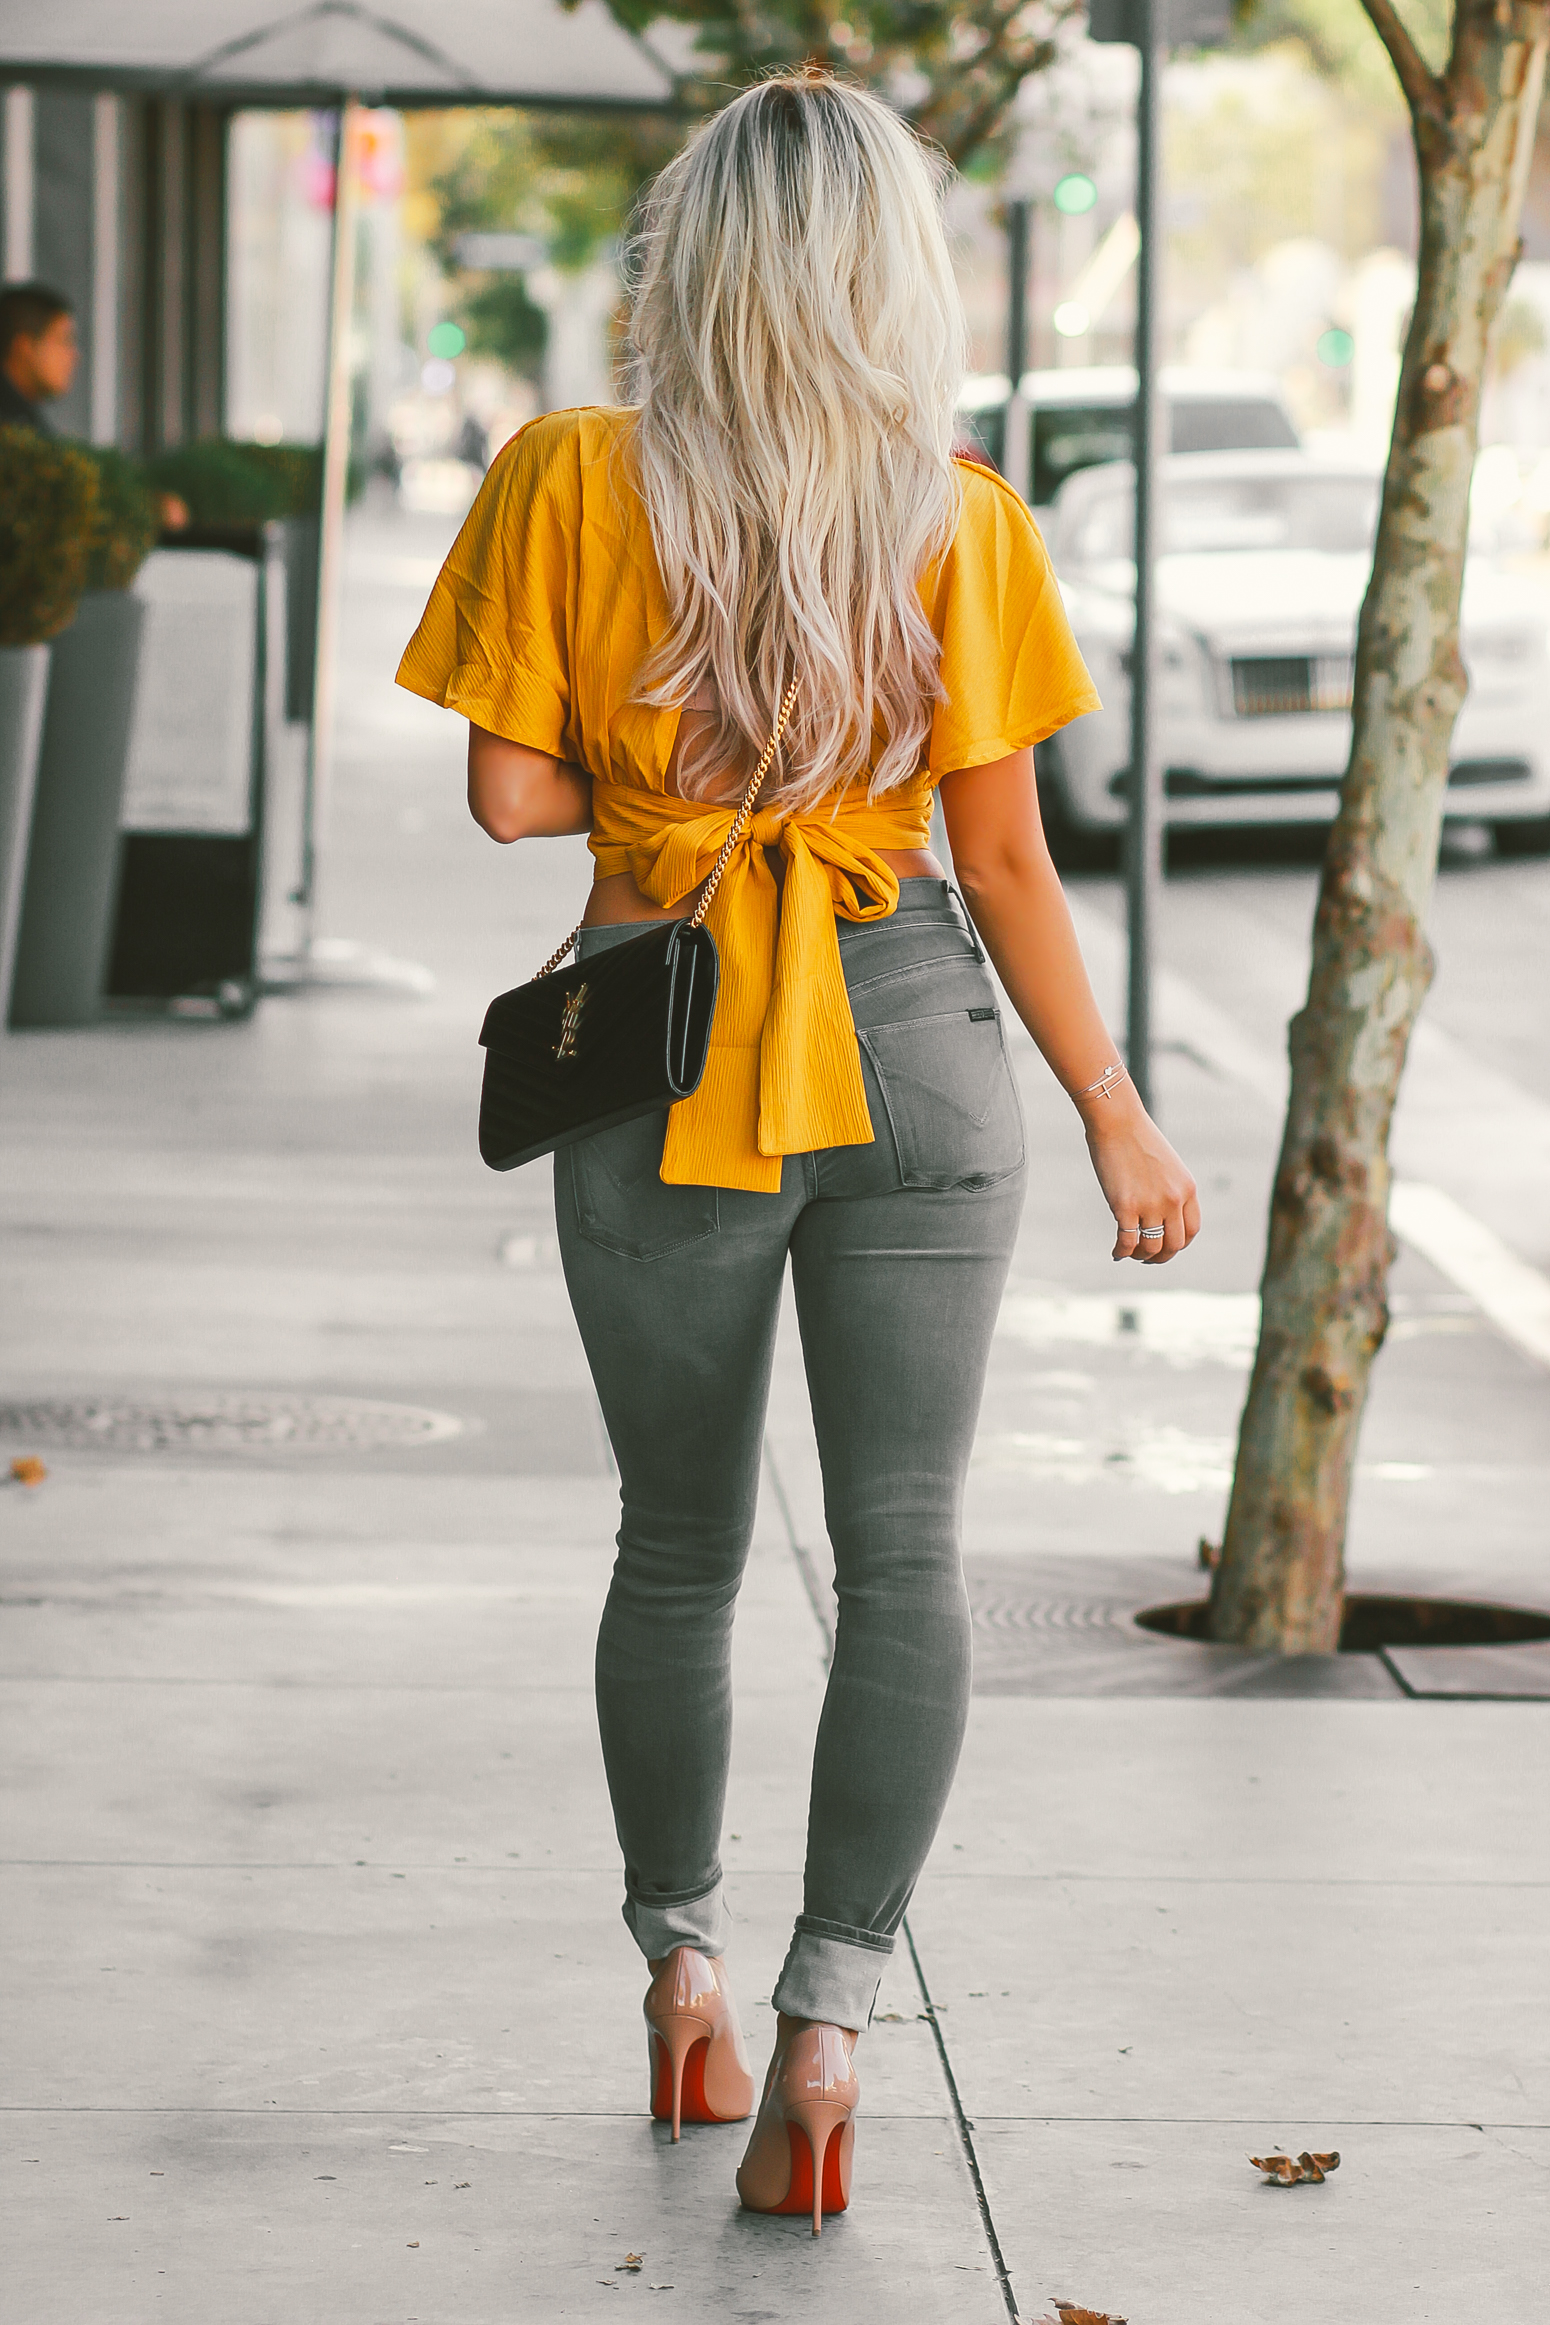 Blondie in the City | My Perfect Grey Jeans | Fall Fashion Inspo | Grey Hudson Jeans, Yellow Flowy Top | Black YSL | Nude Louboutin's